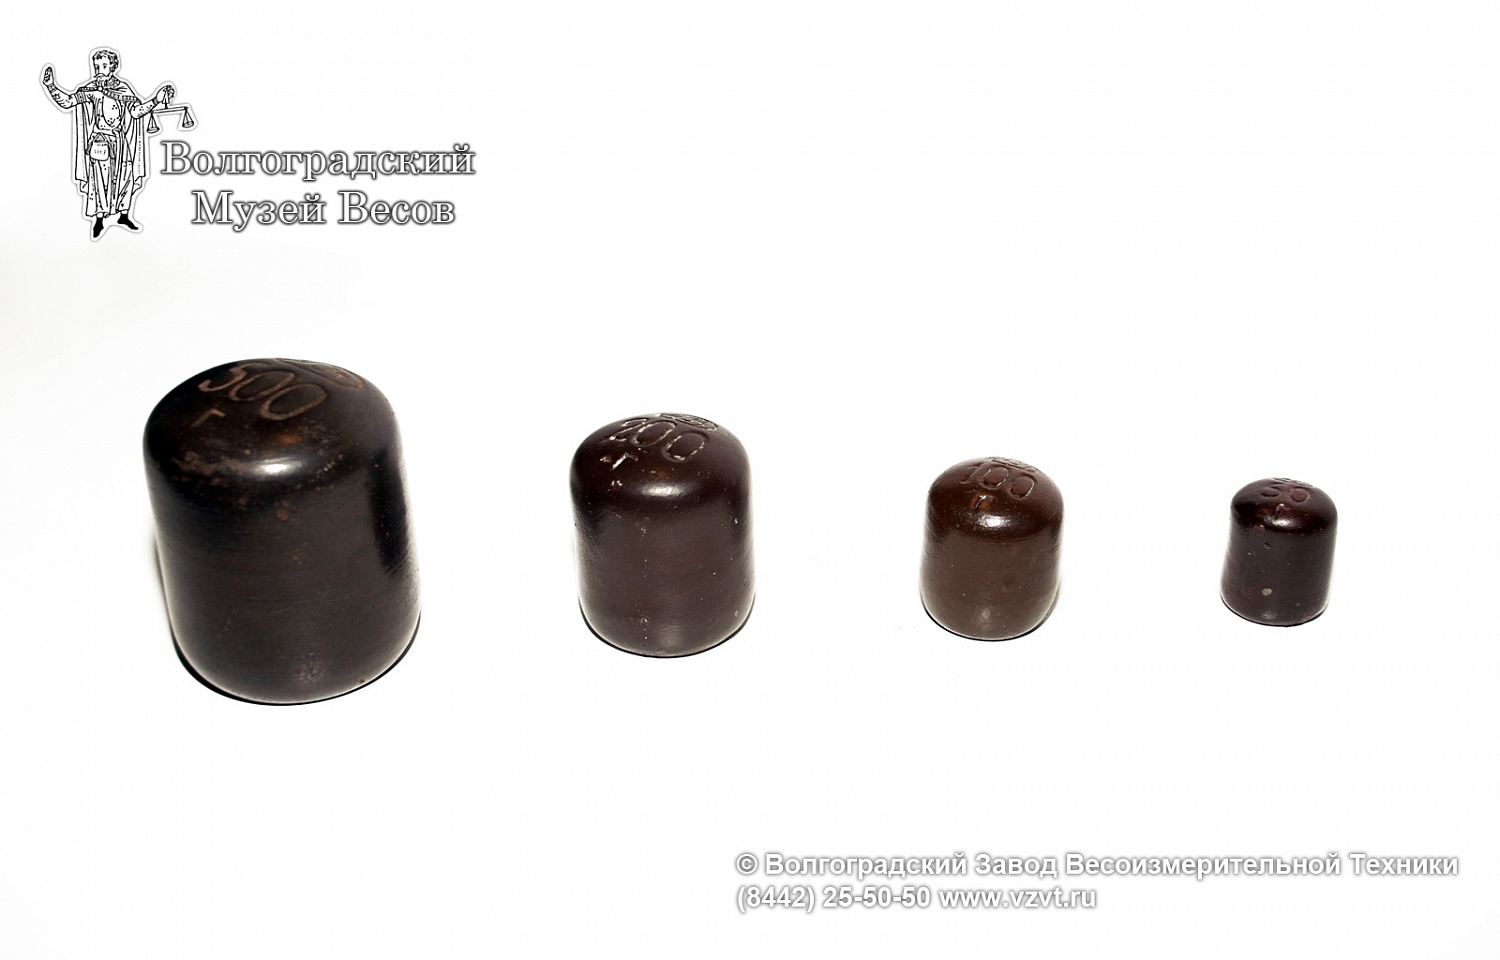 Set of ceramic weights by Komintern factory. The USSR, 1934